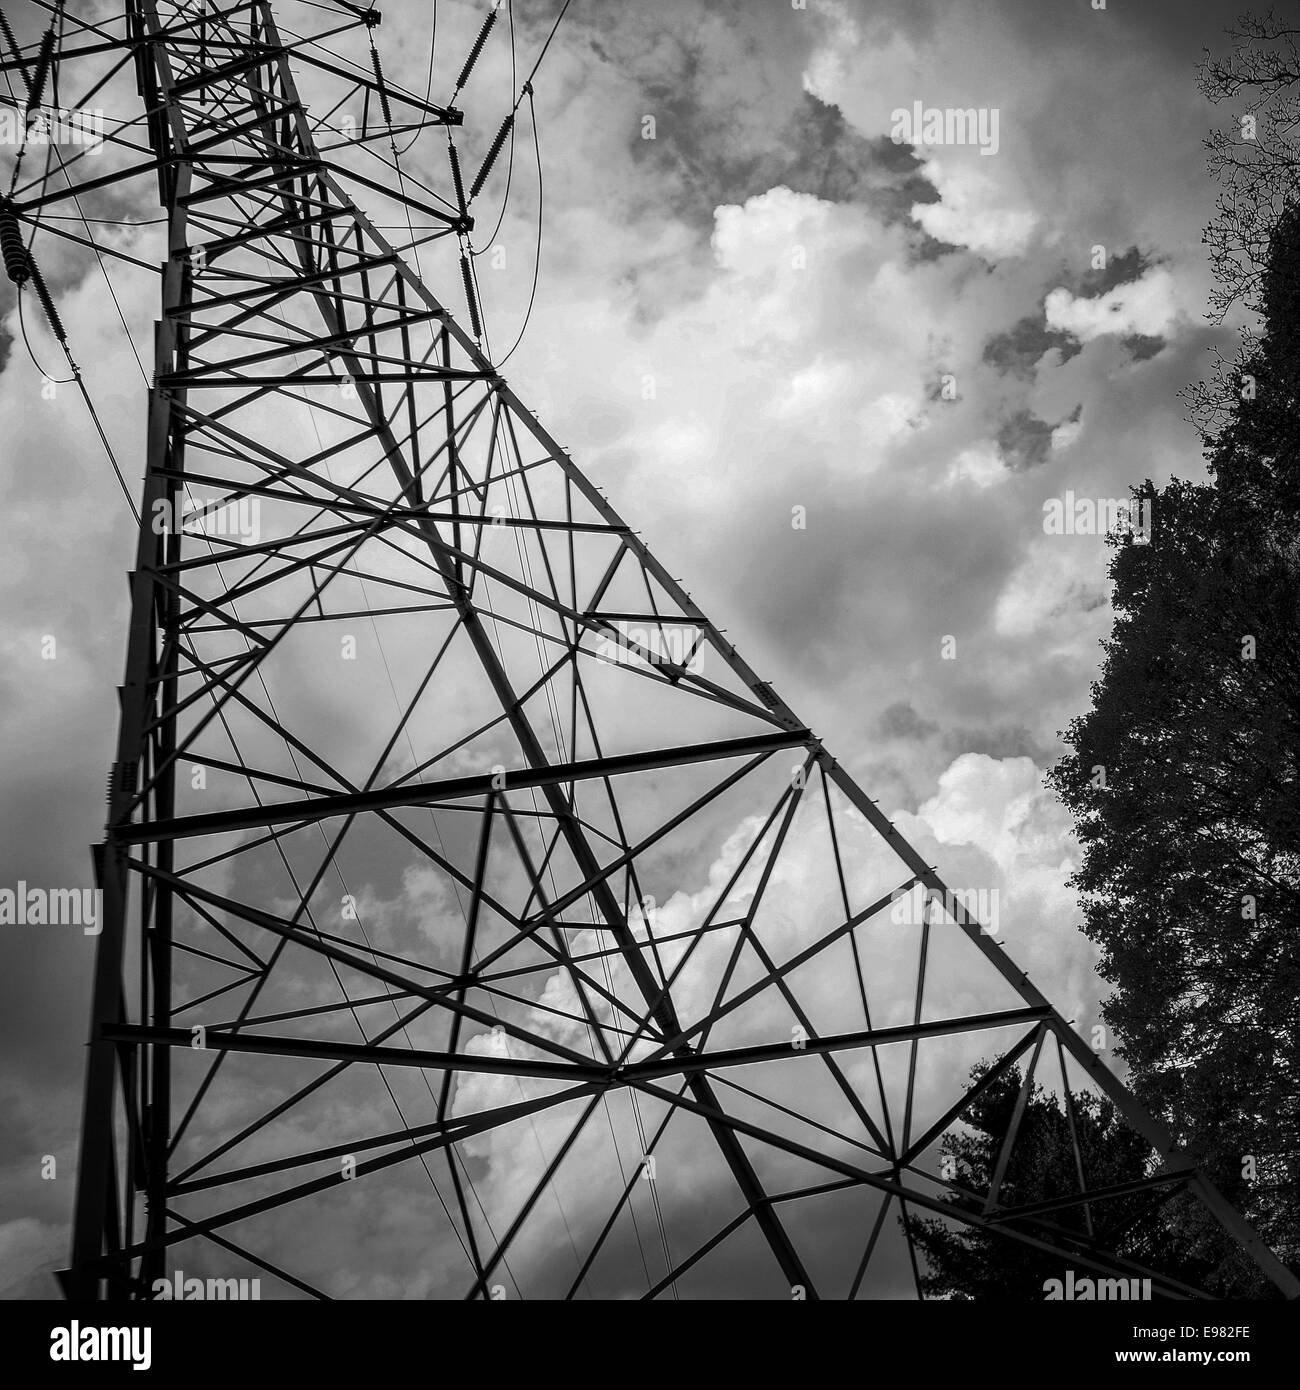 Black and White low angle view of metal electric tower against intense storm clouds. Stock Photo